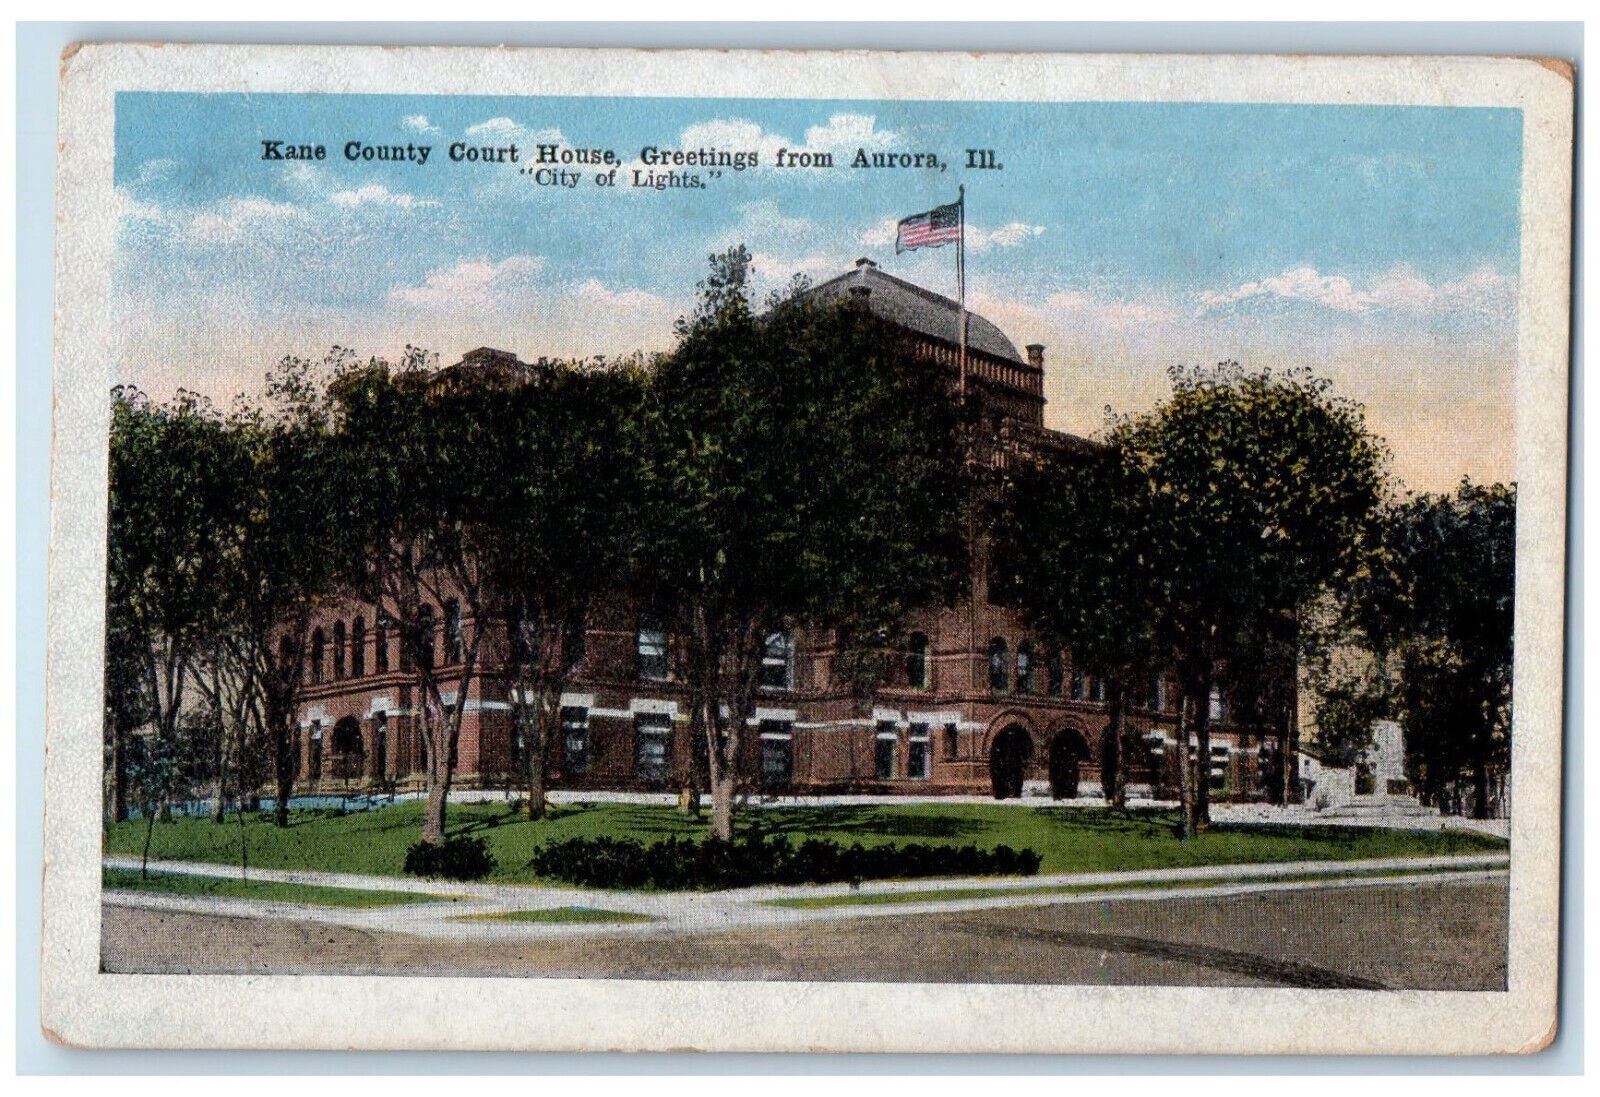 c1920s Kane County Court House, Greetings from Aurora IL City of Lights Postcard